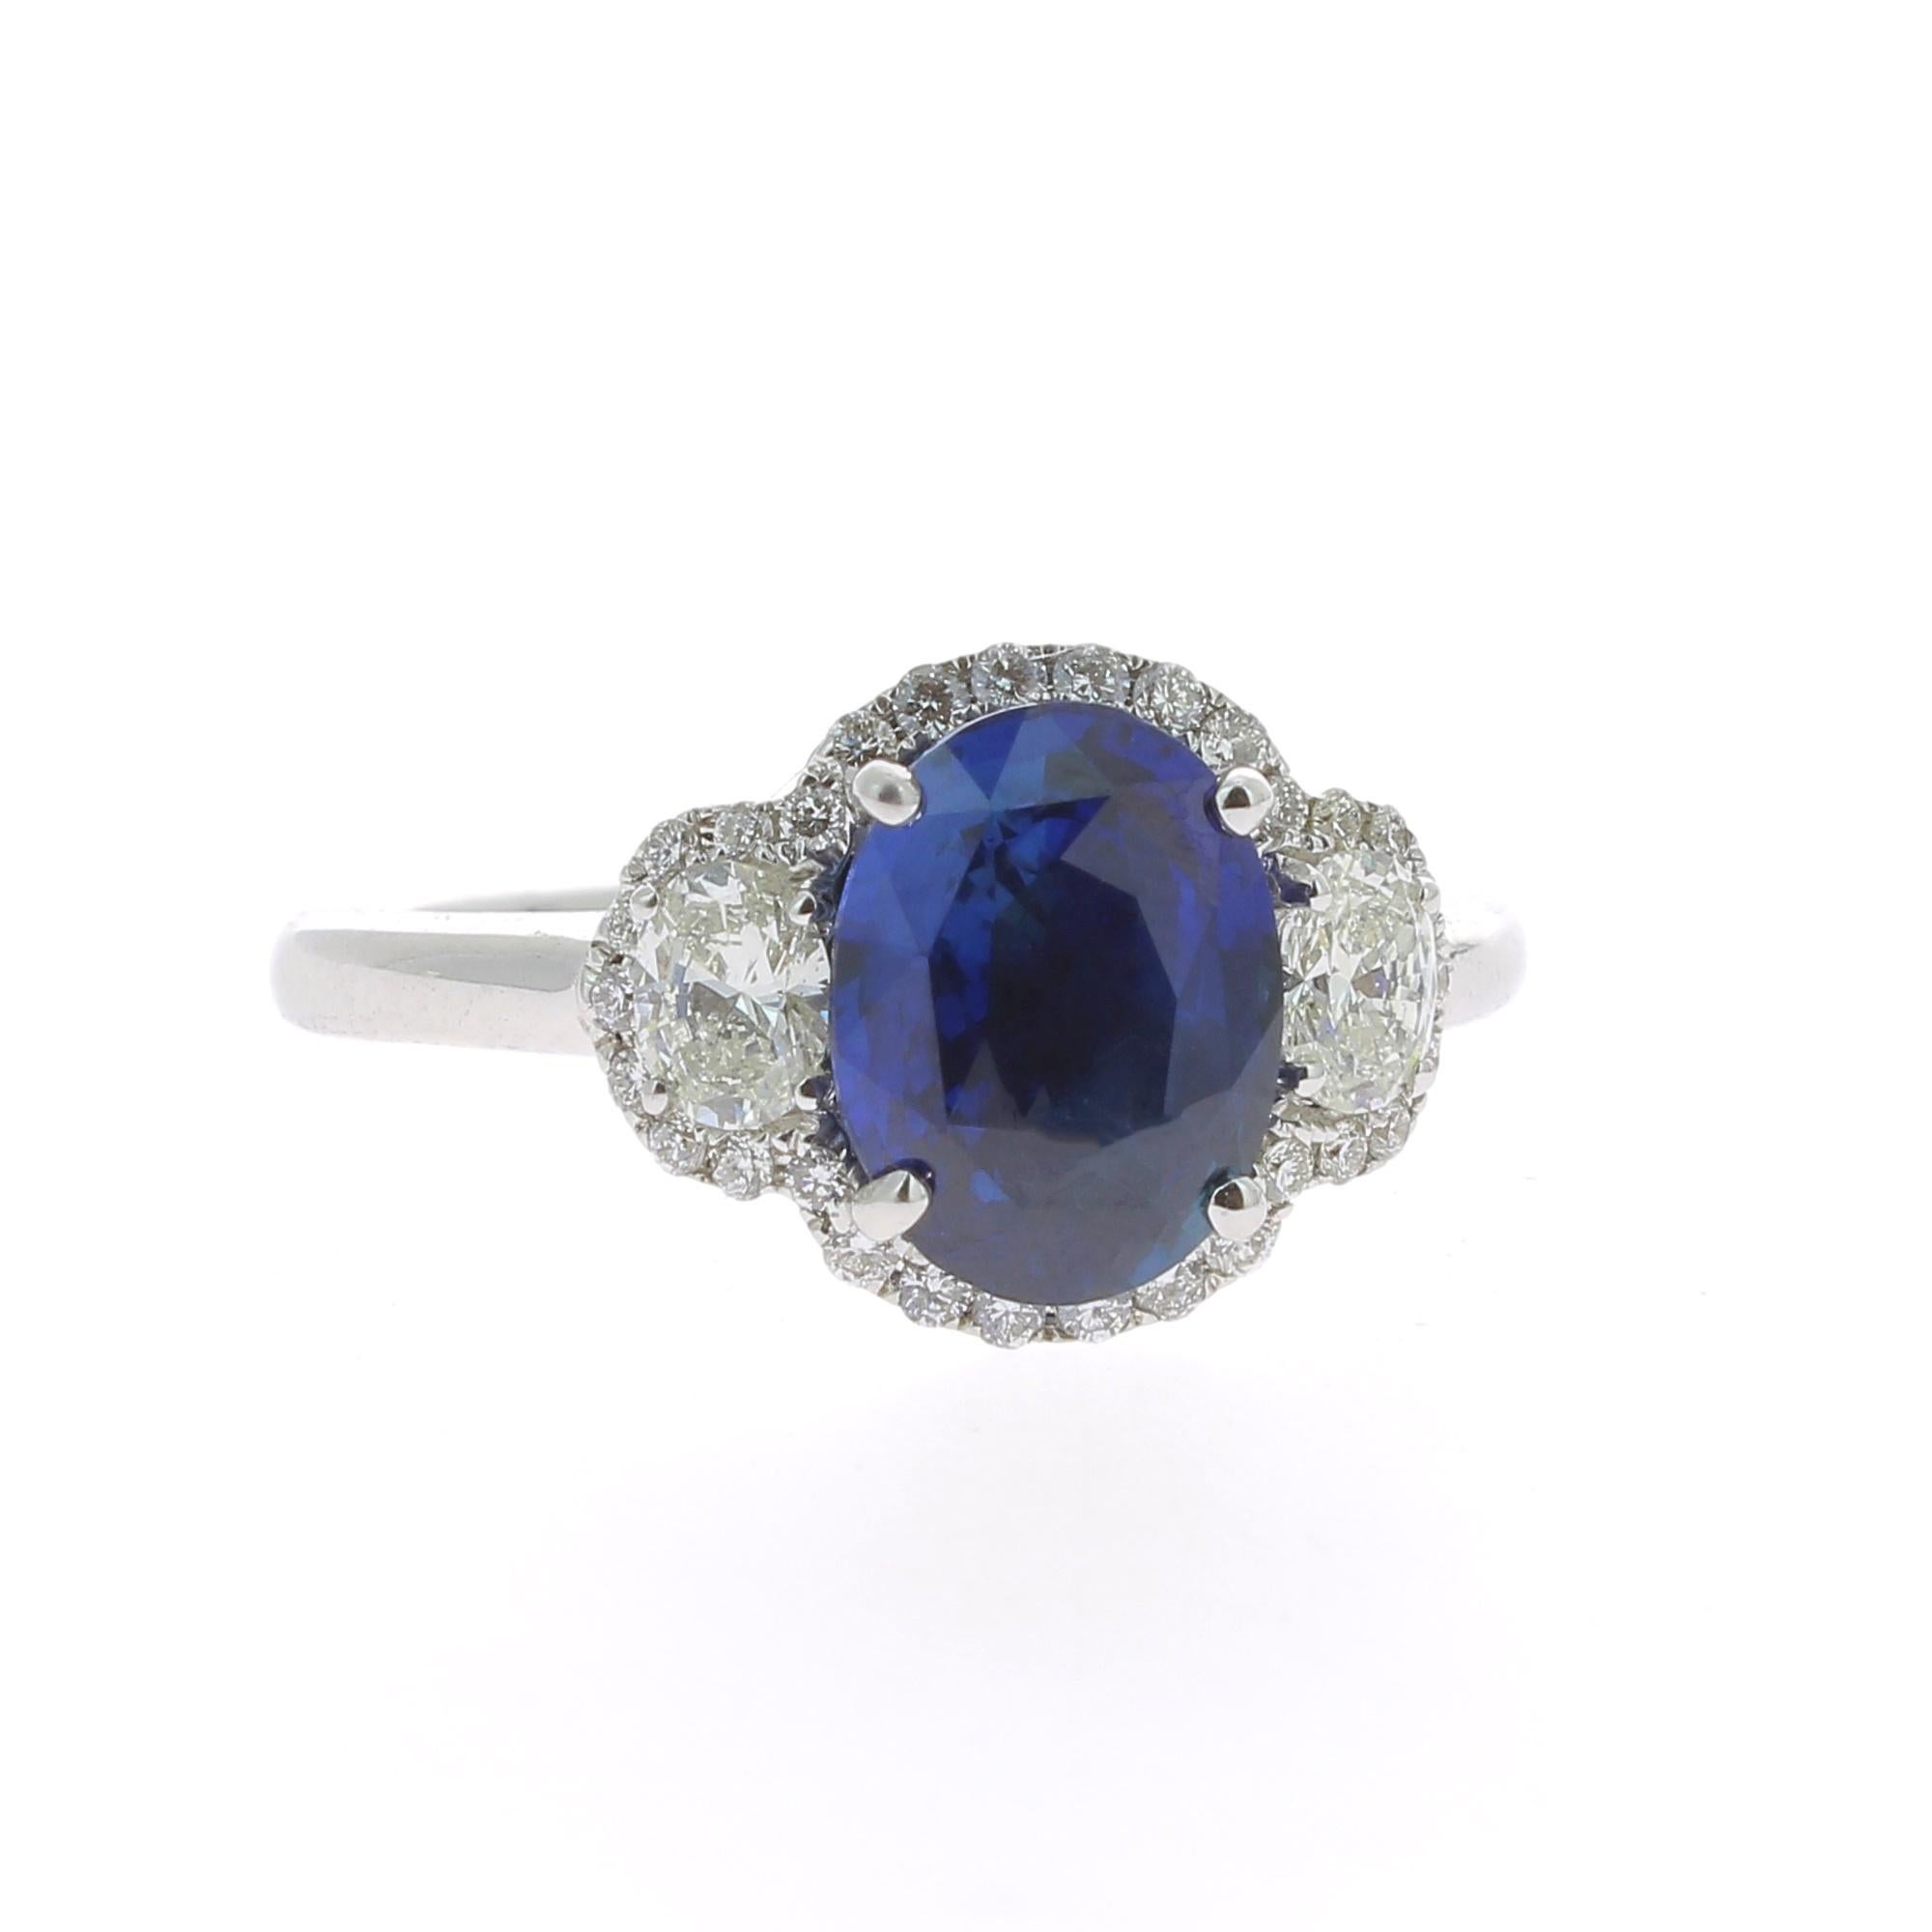 An amazing Blue Sapphire Ring flanked on each side by a single Oval Diamond and surrounded by an halo of Round Diamond.
The total weight of the Sapphire is 2.77 Carats, the gemstone is certified as a Blue Standard Heat Only Sapphire. 
The Oval